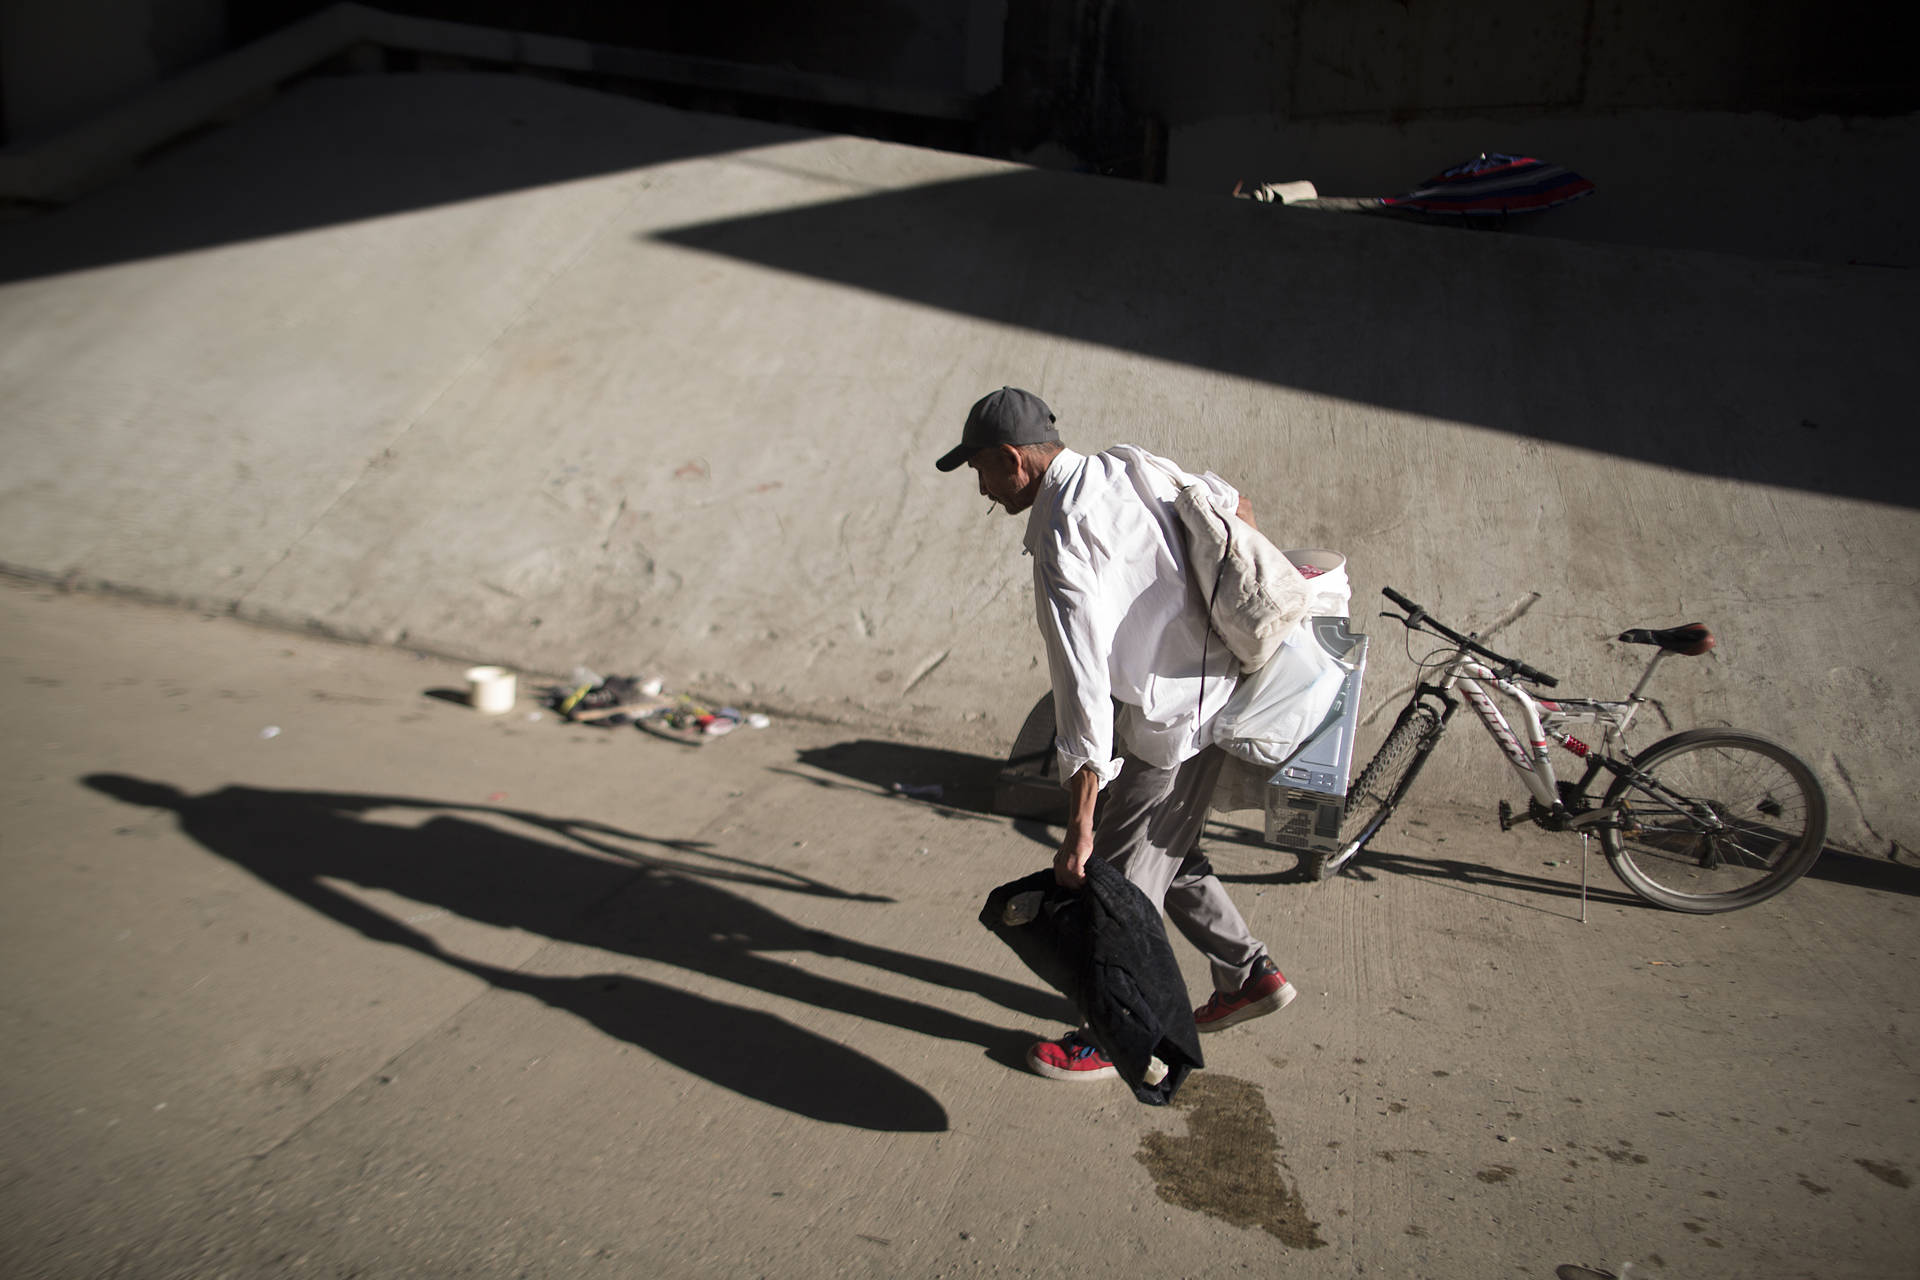 Fernando Lopez carries possessions from the Los Angeles River on Nov. 20, 2015, in Los Angeles, California. Many of the estimated 26,000 homeless in L.A. live in riverbeds and storm drains that could quickly turn deadly during powerful storms.  David McNew/Getty Images